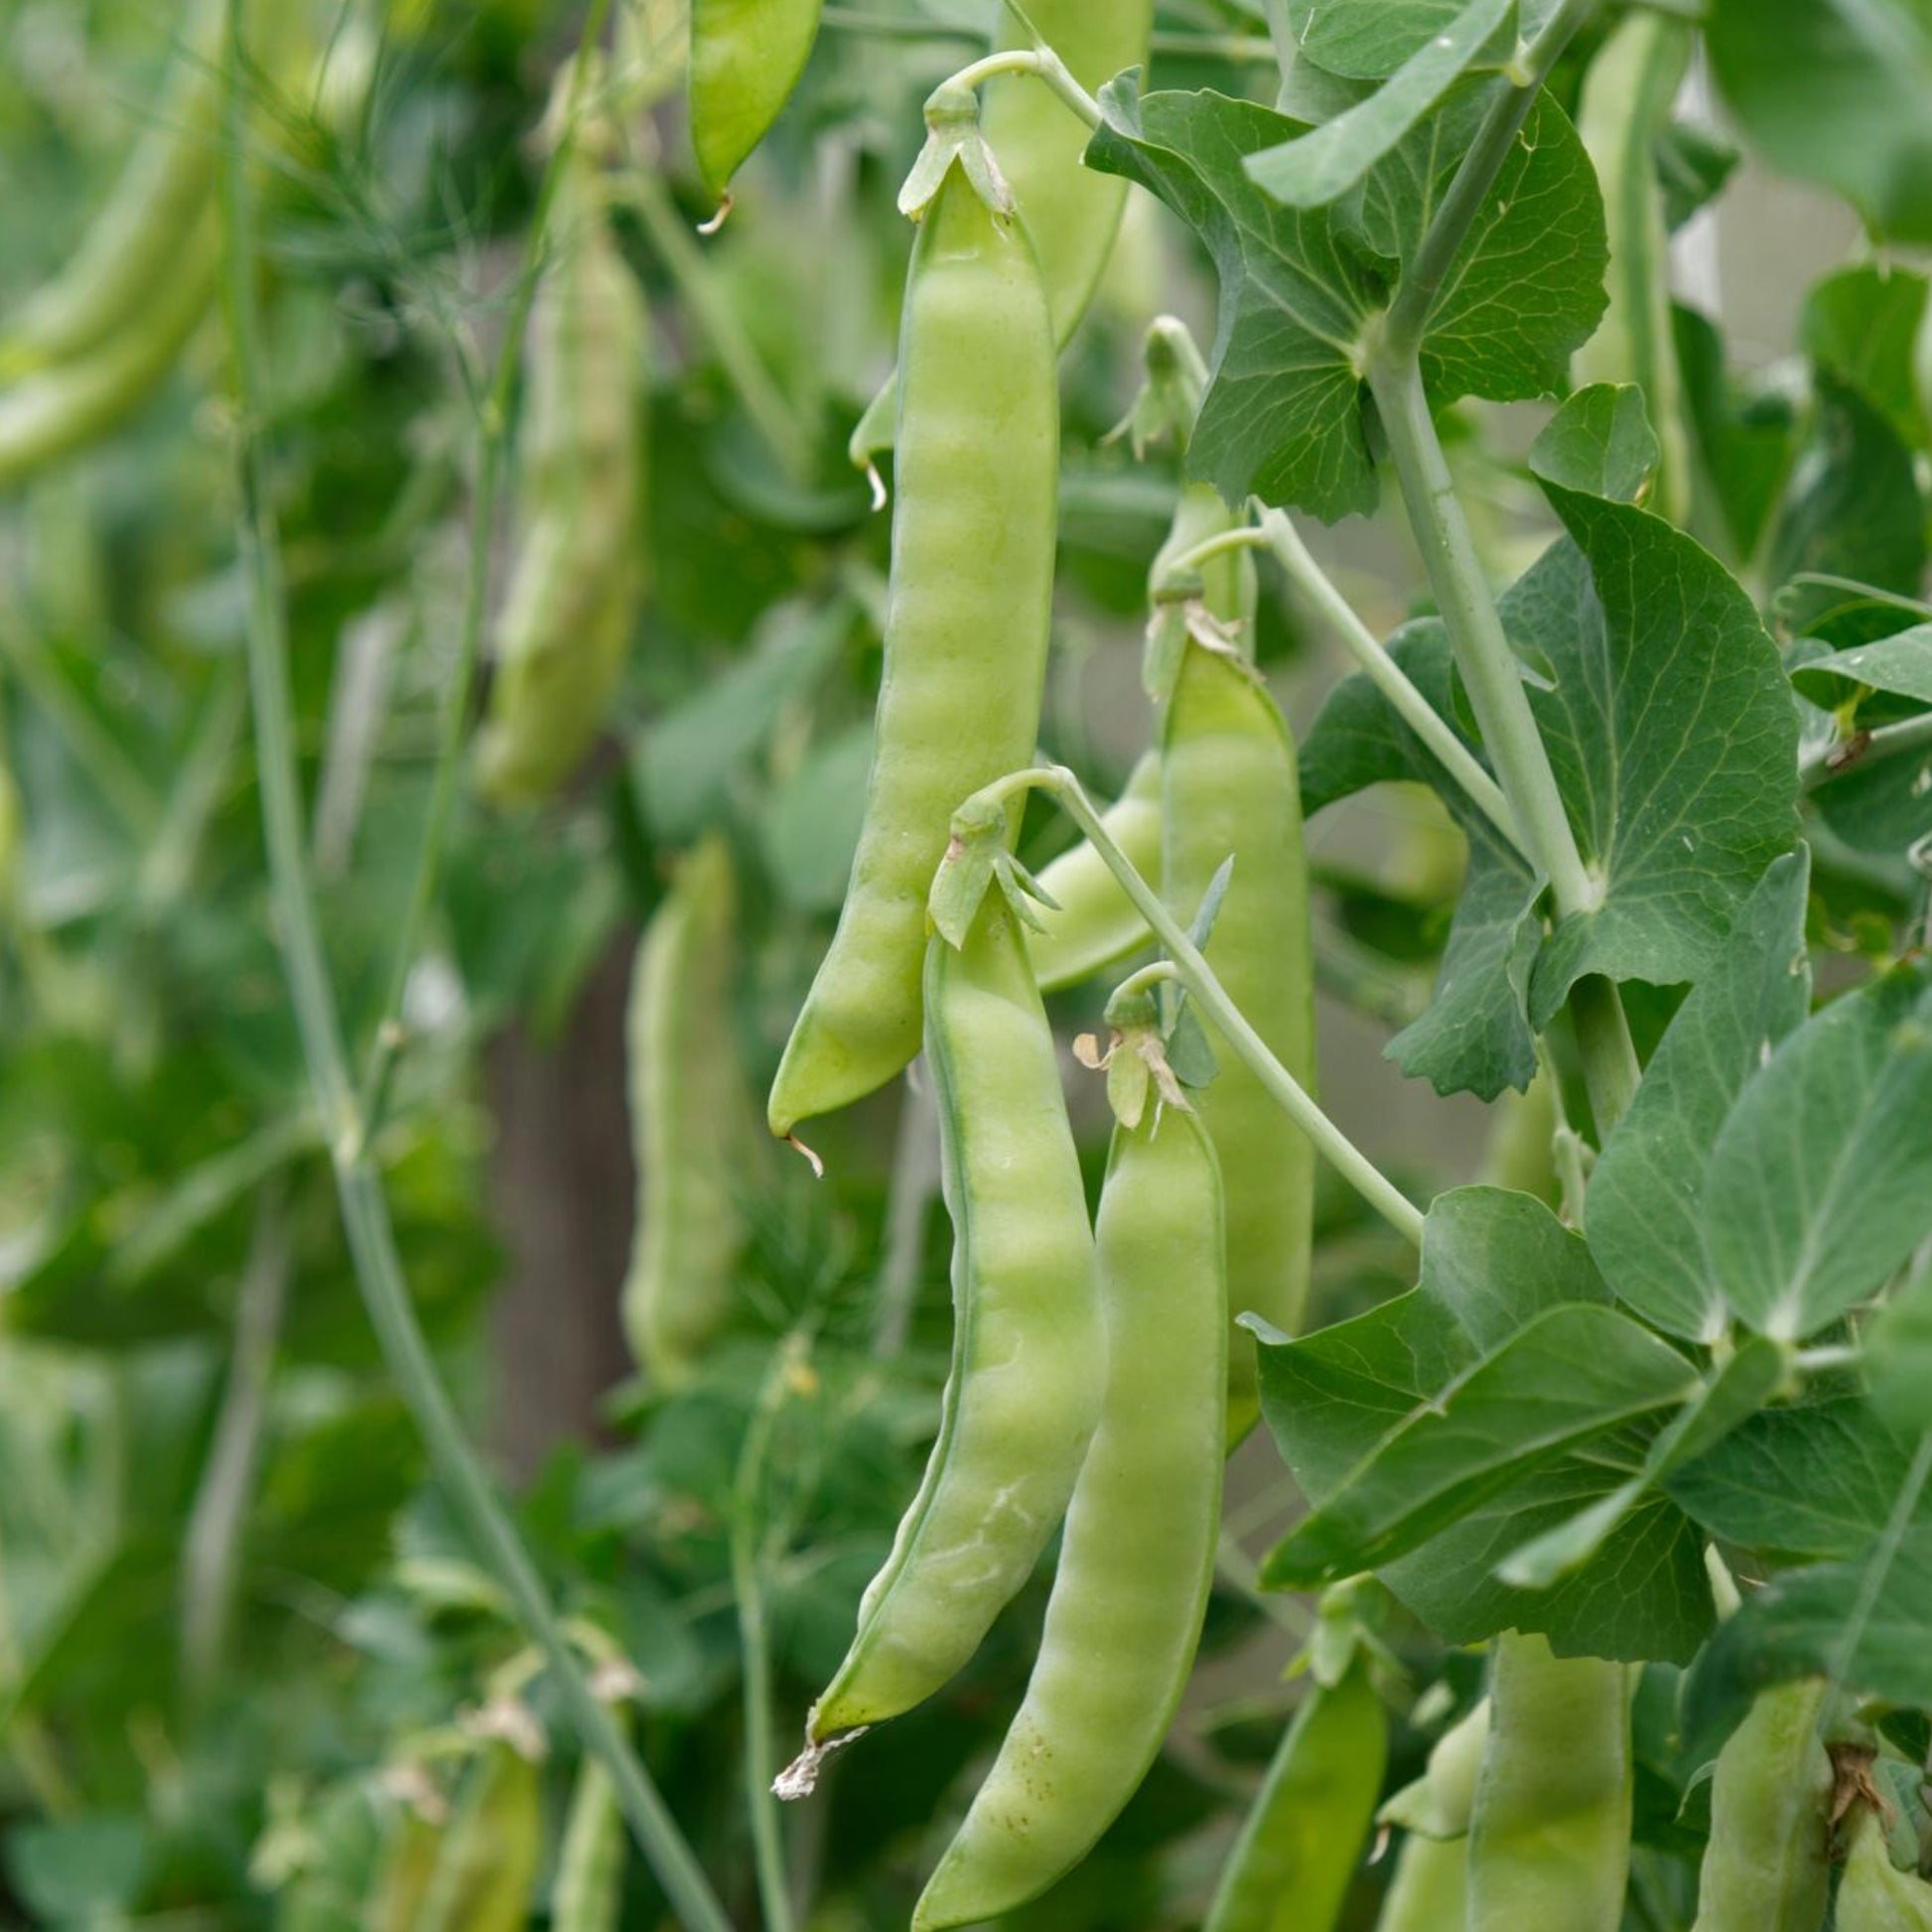 Oregon Giant Snow Peas - Seeds - Non Gmo - Heirloom Seeds – Pea Seeds - Grow Your Own Food At Home! - Fast Growing Variety!   